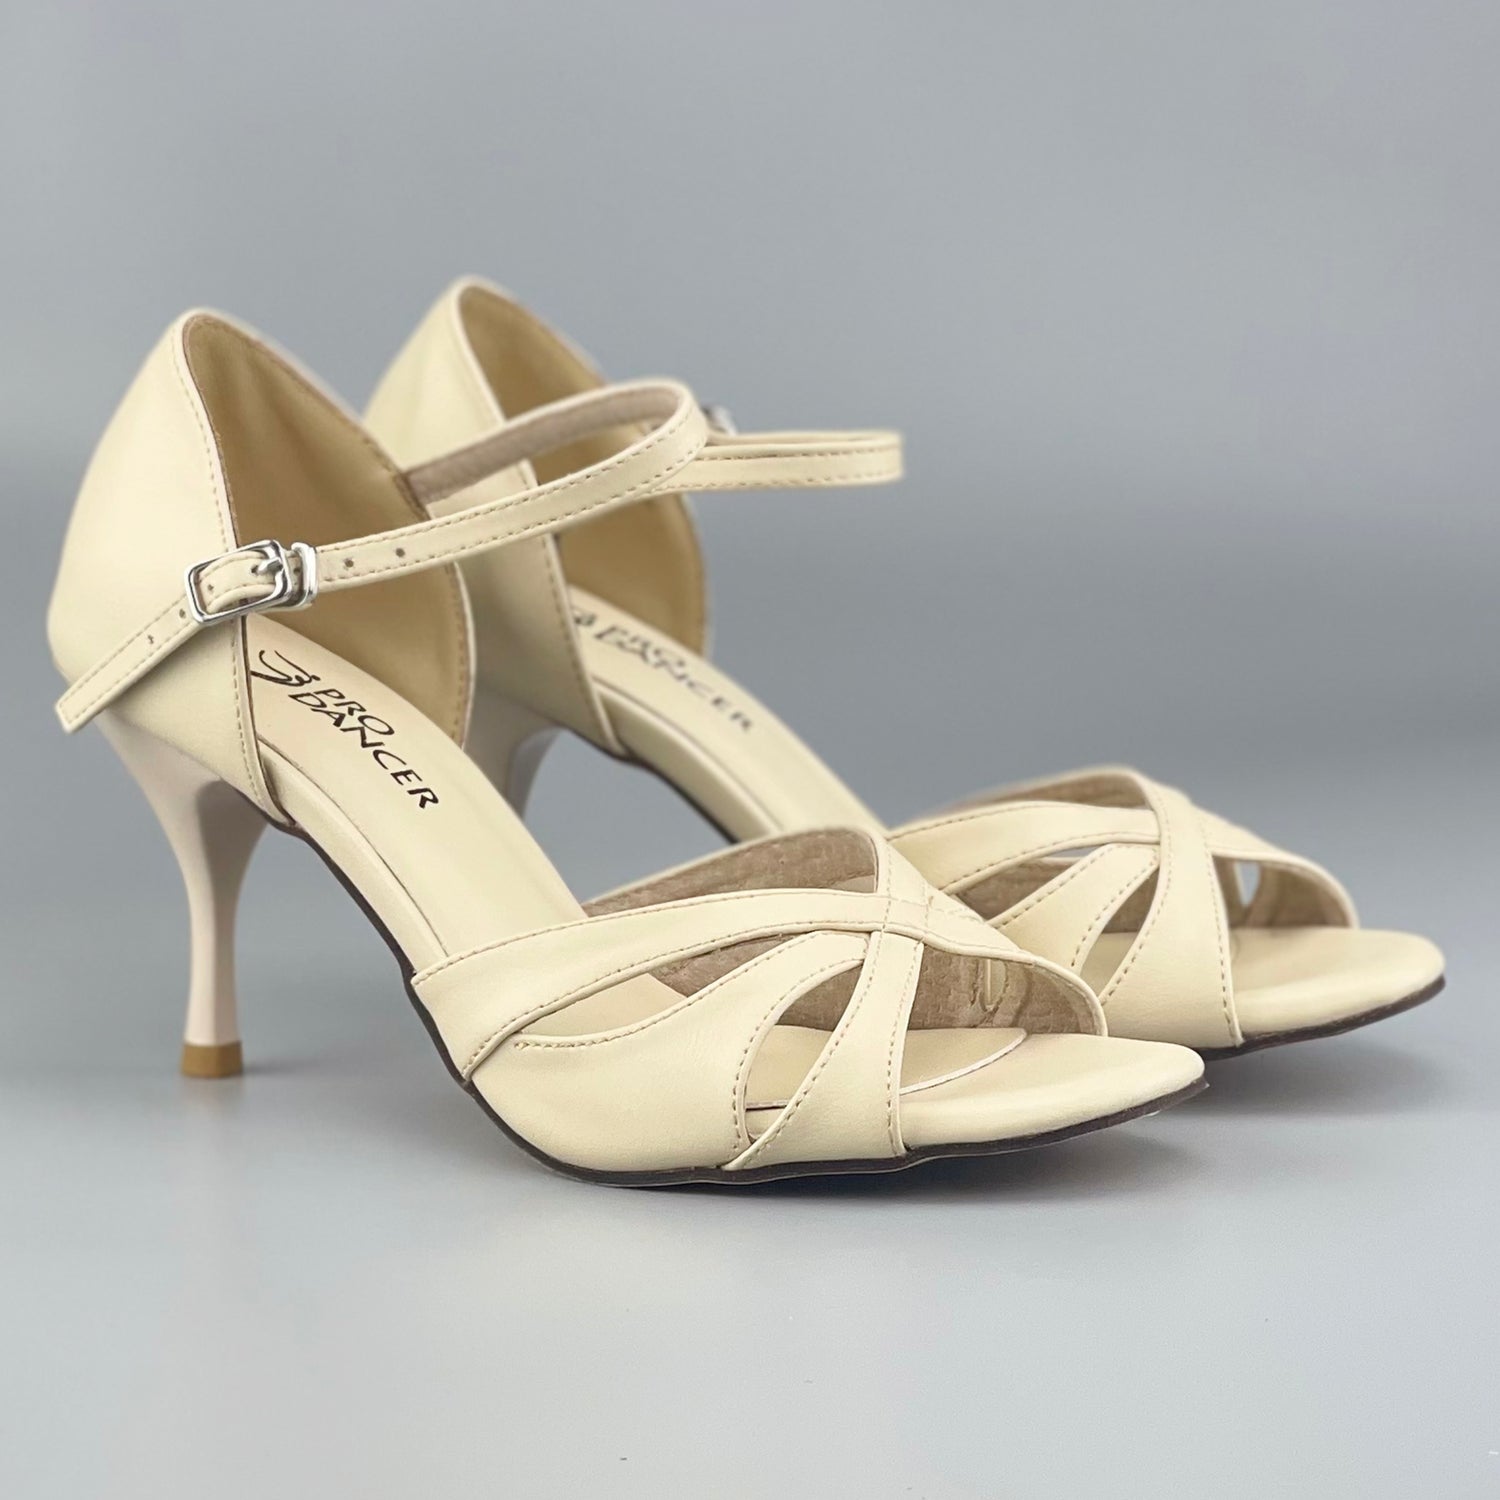 Pro Dancer Tango Argentino Shoes high heel dance sandals with leather sole in beige color (PD-9061A)2